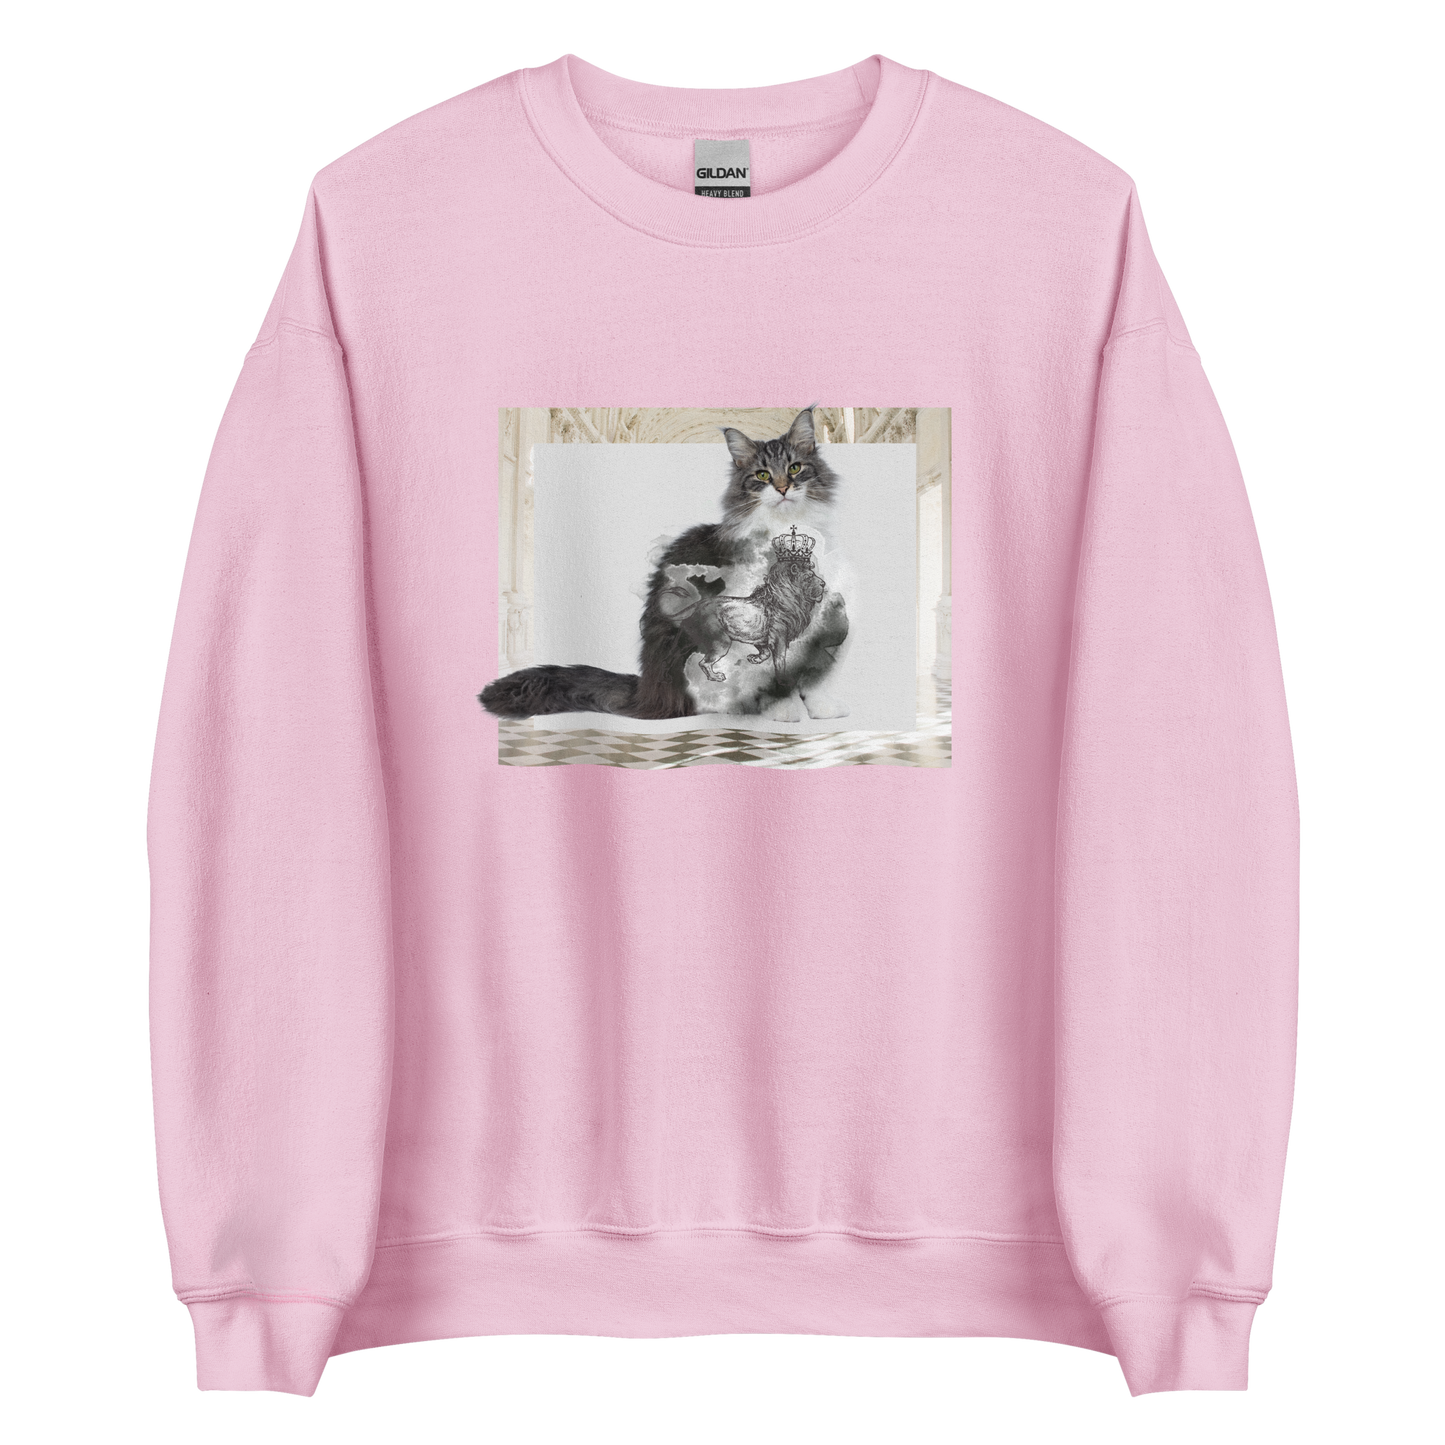 Light Pink Royal Cat Sweatshirt featuring a Majestic Cat graphic on the chest - Cute Graphic Cat Sweatshirts - Boozy Fox